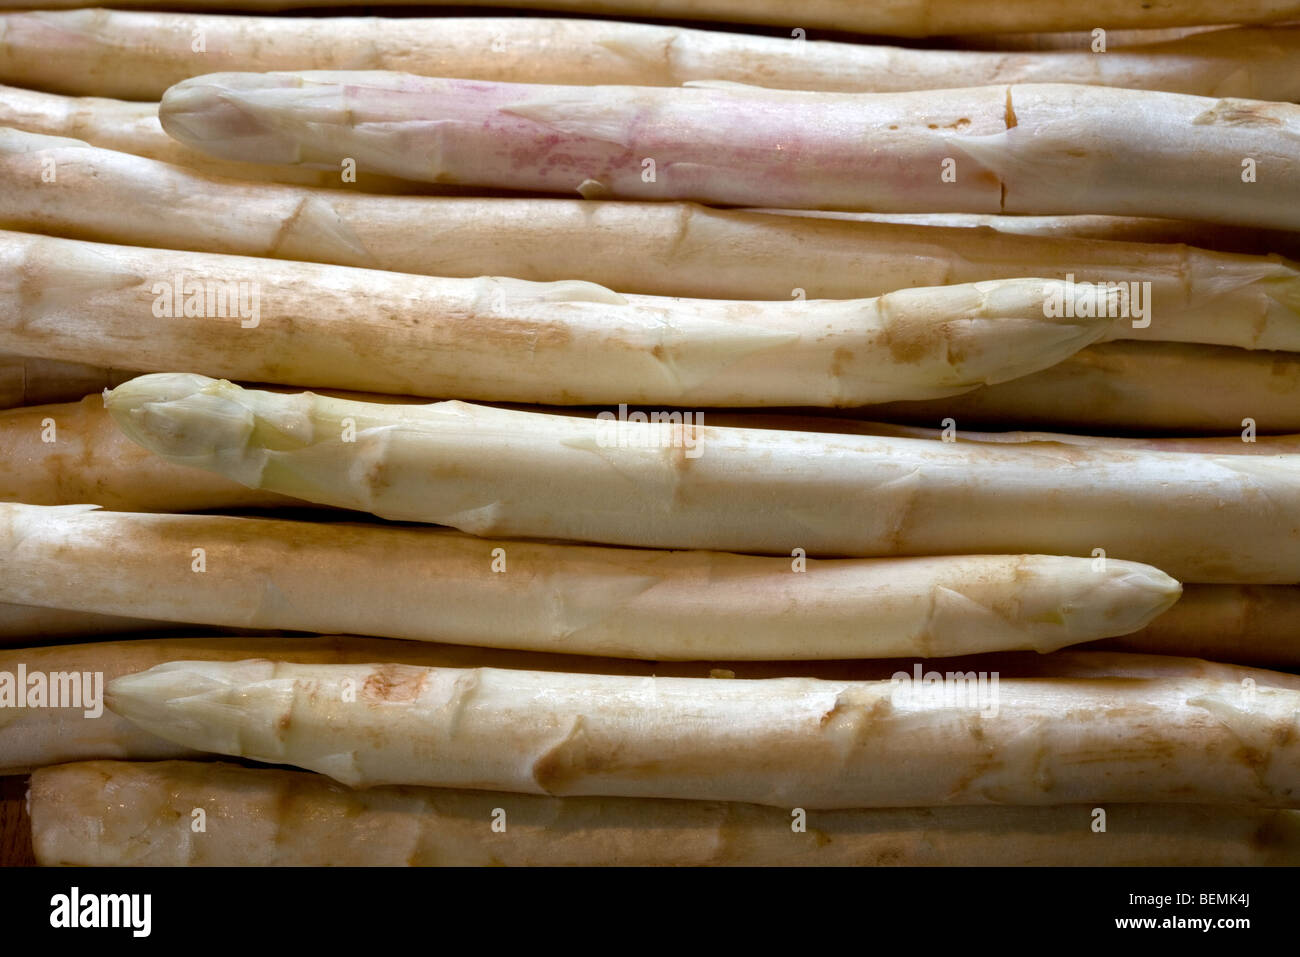 Bundle of harvested white asparagus (Asparagus officinalis) shoots for food consumption Stock Photo